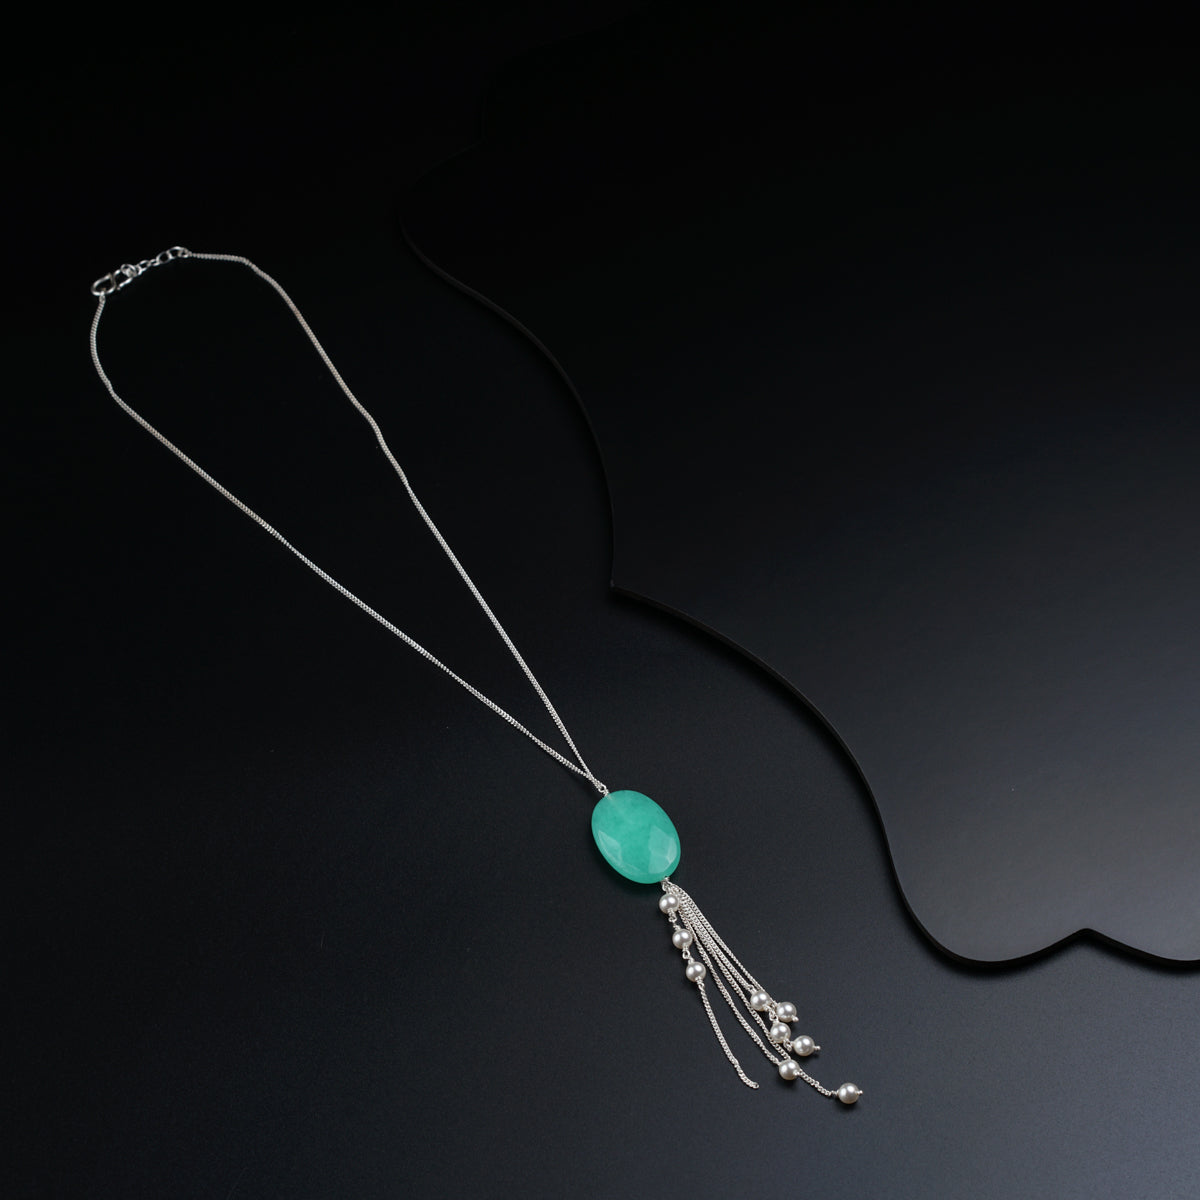 Silver chain with Jade Pendant and Pearls